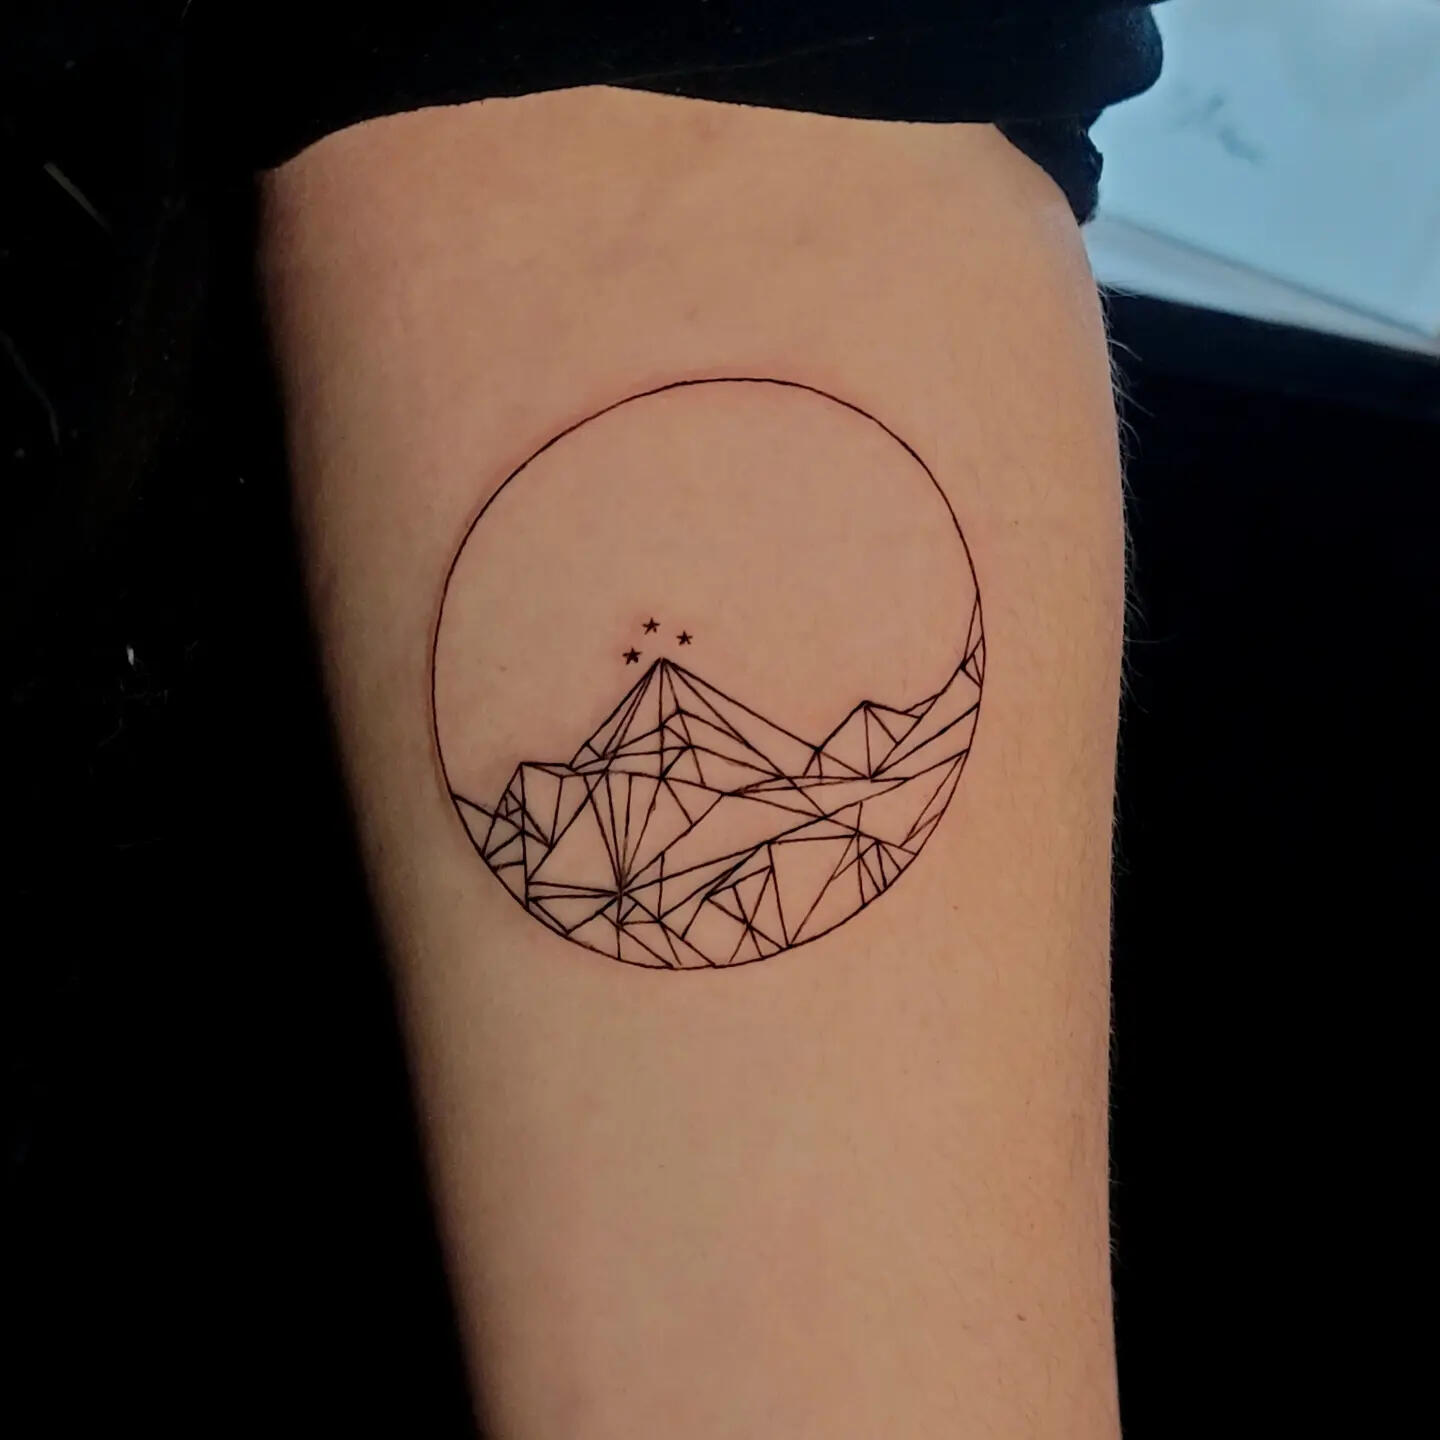 101 Amazing Mountain Tattoo Ideas You Need To See  Mountain tattoo  Bookish tattoos Moutain tattoos